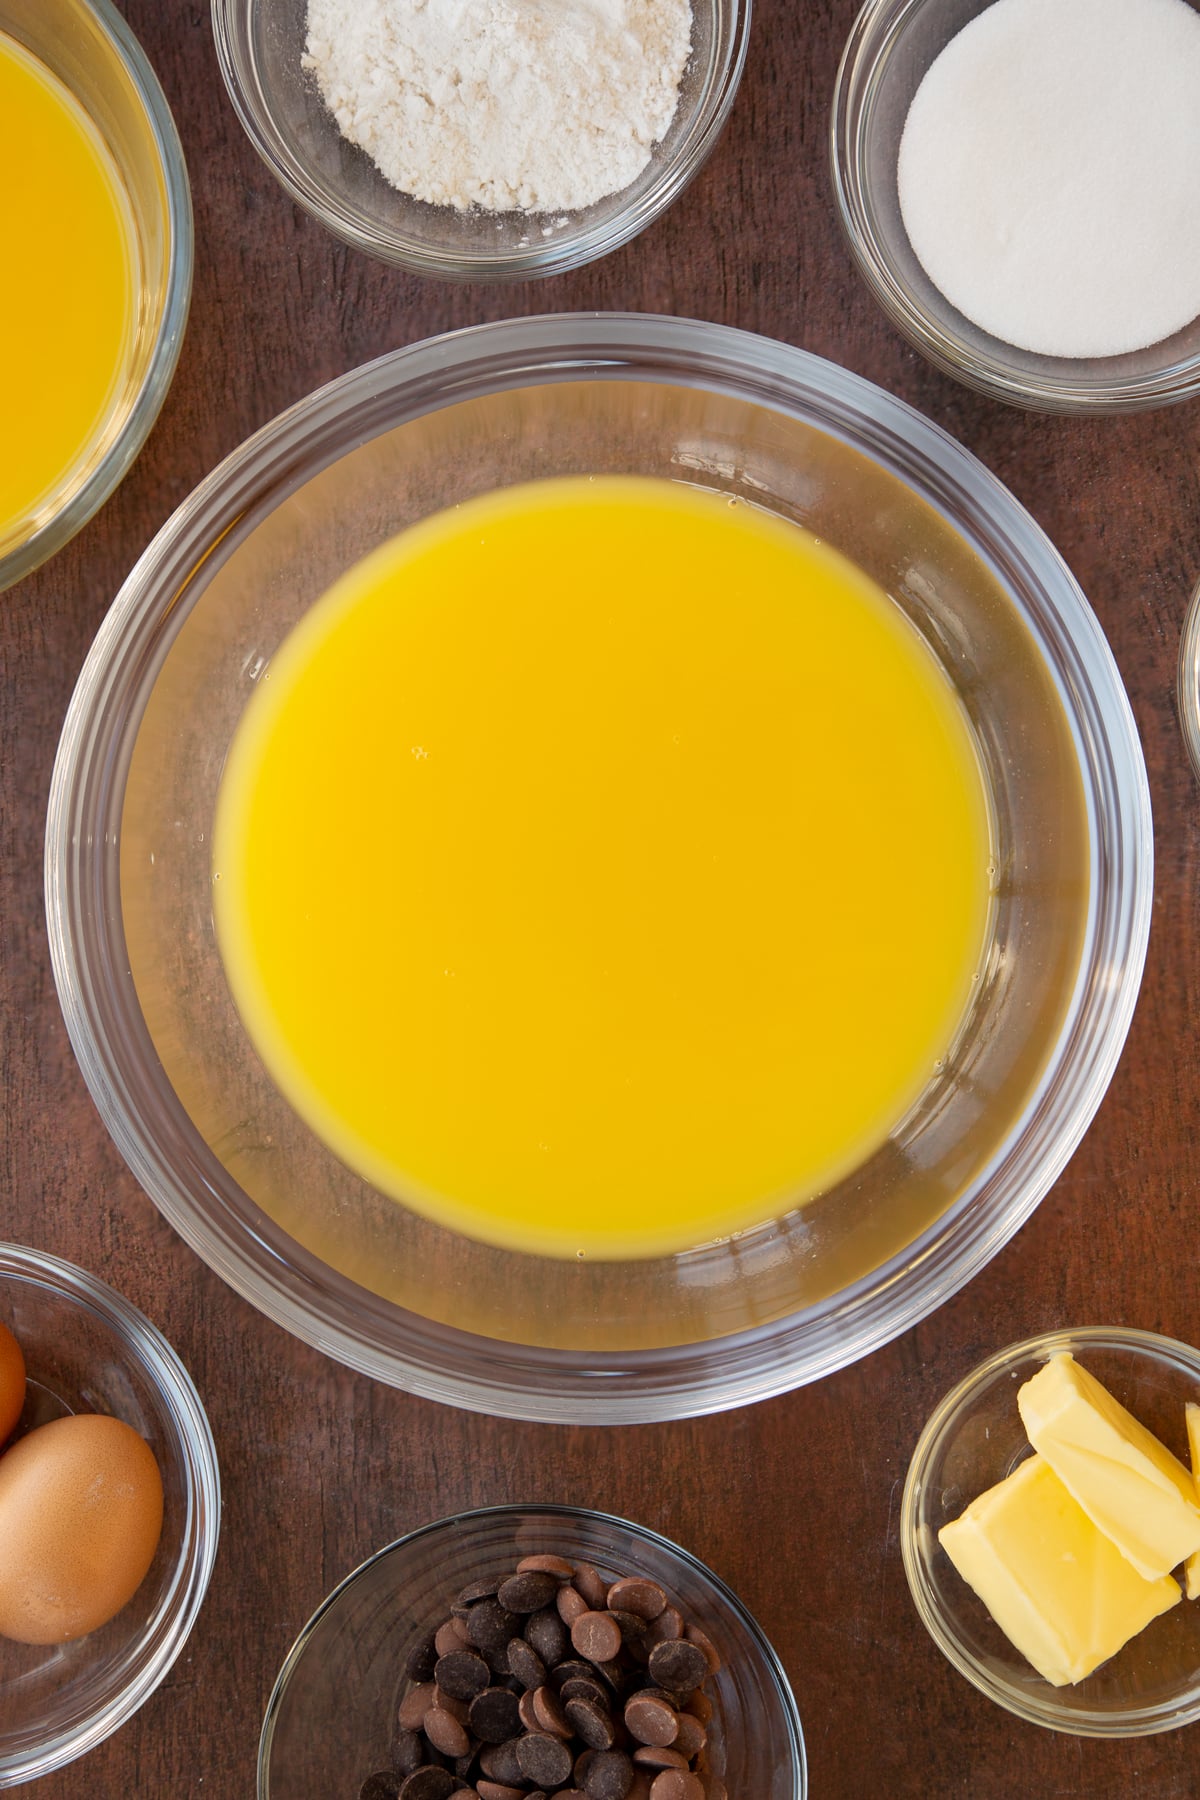 Adding orange juice and the geletine mixture to a mixing bowl.